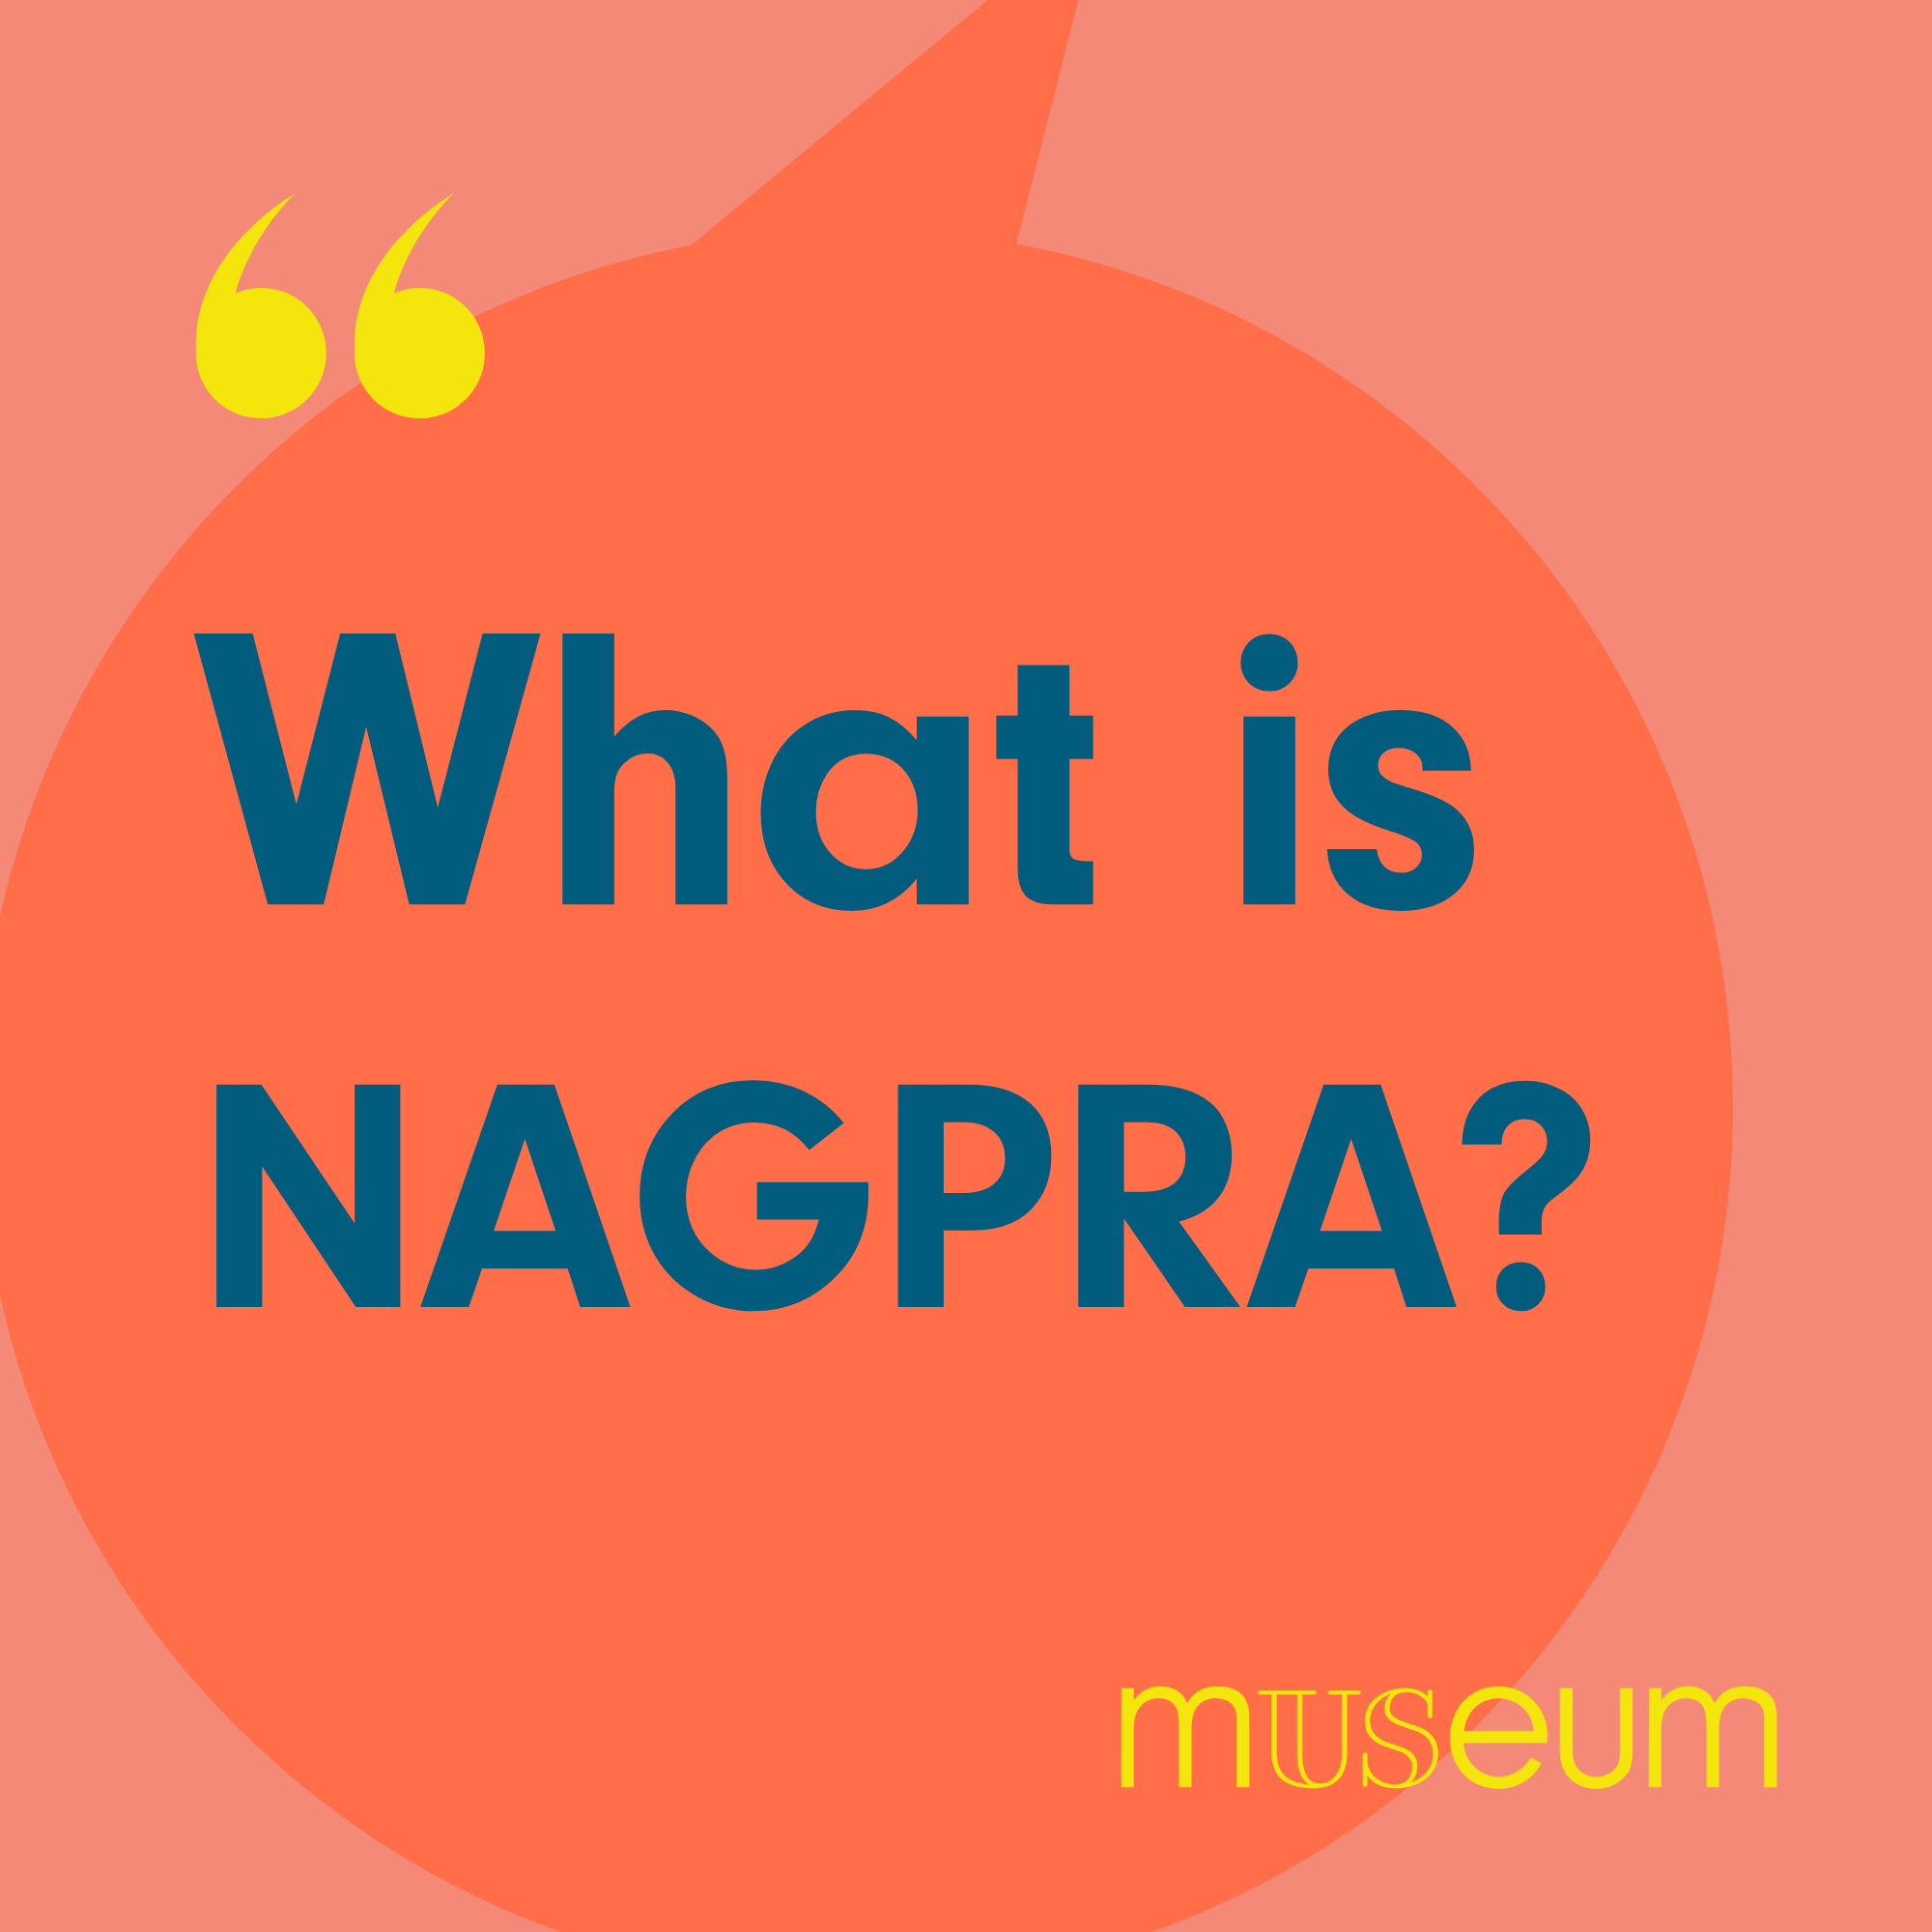 Graphically designed image with an orange speech bubble on top of a slightly lighter shade of orange background. Blue text in the speech bubble says "What is NAGPRA?"